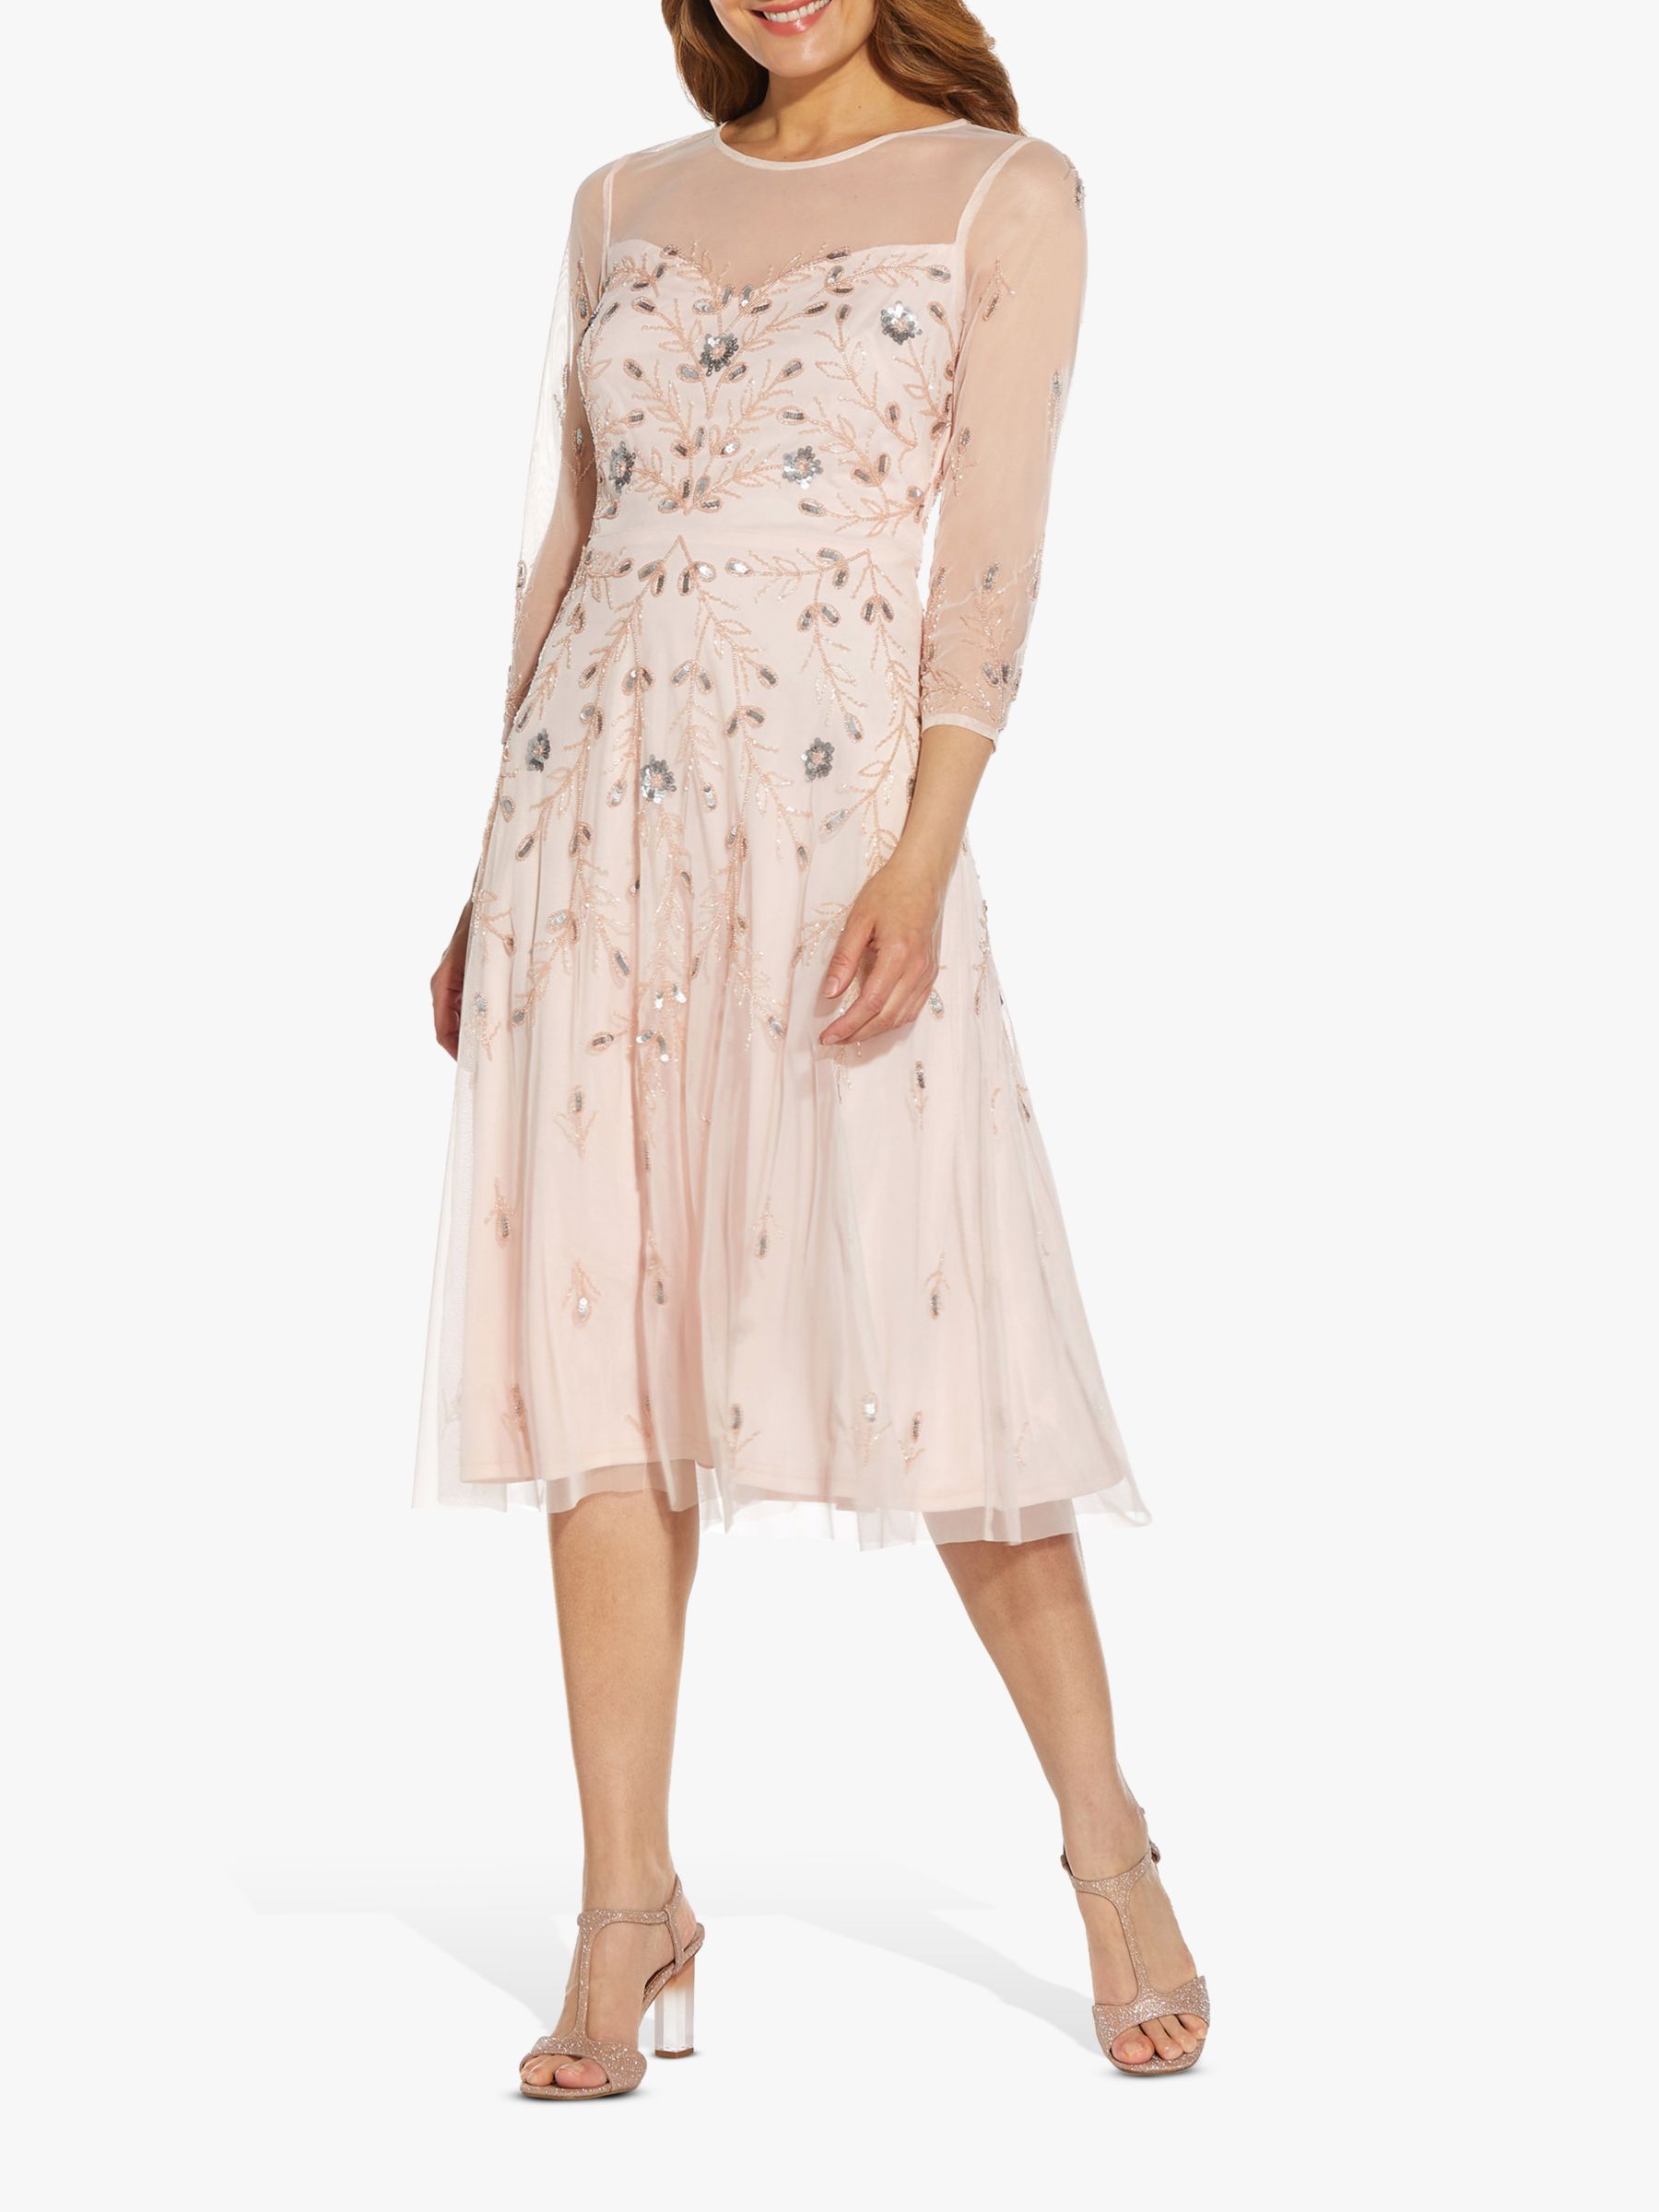 Adrianna Papell Floral Beaded Mesh Dress, Pale Pink at John Lewis ...